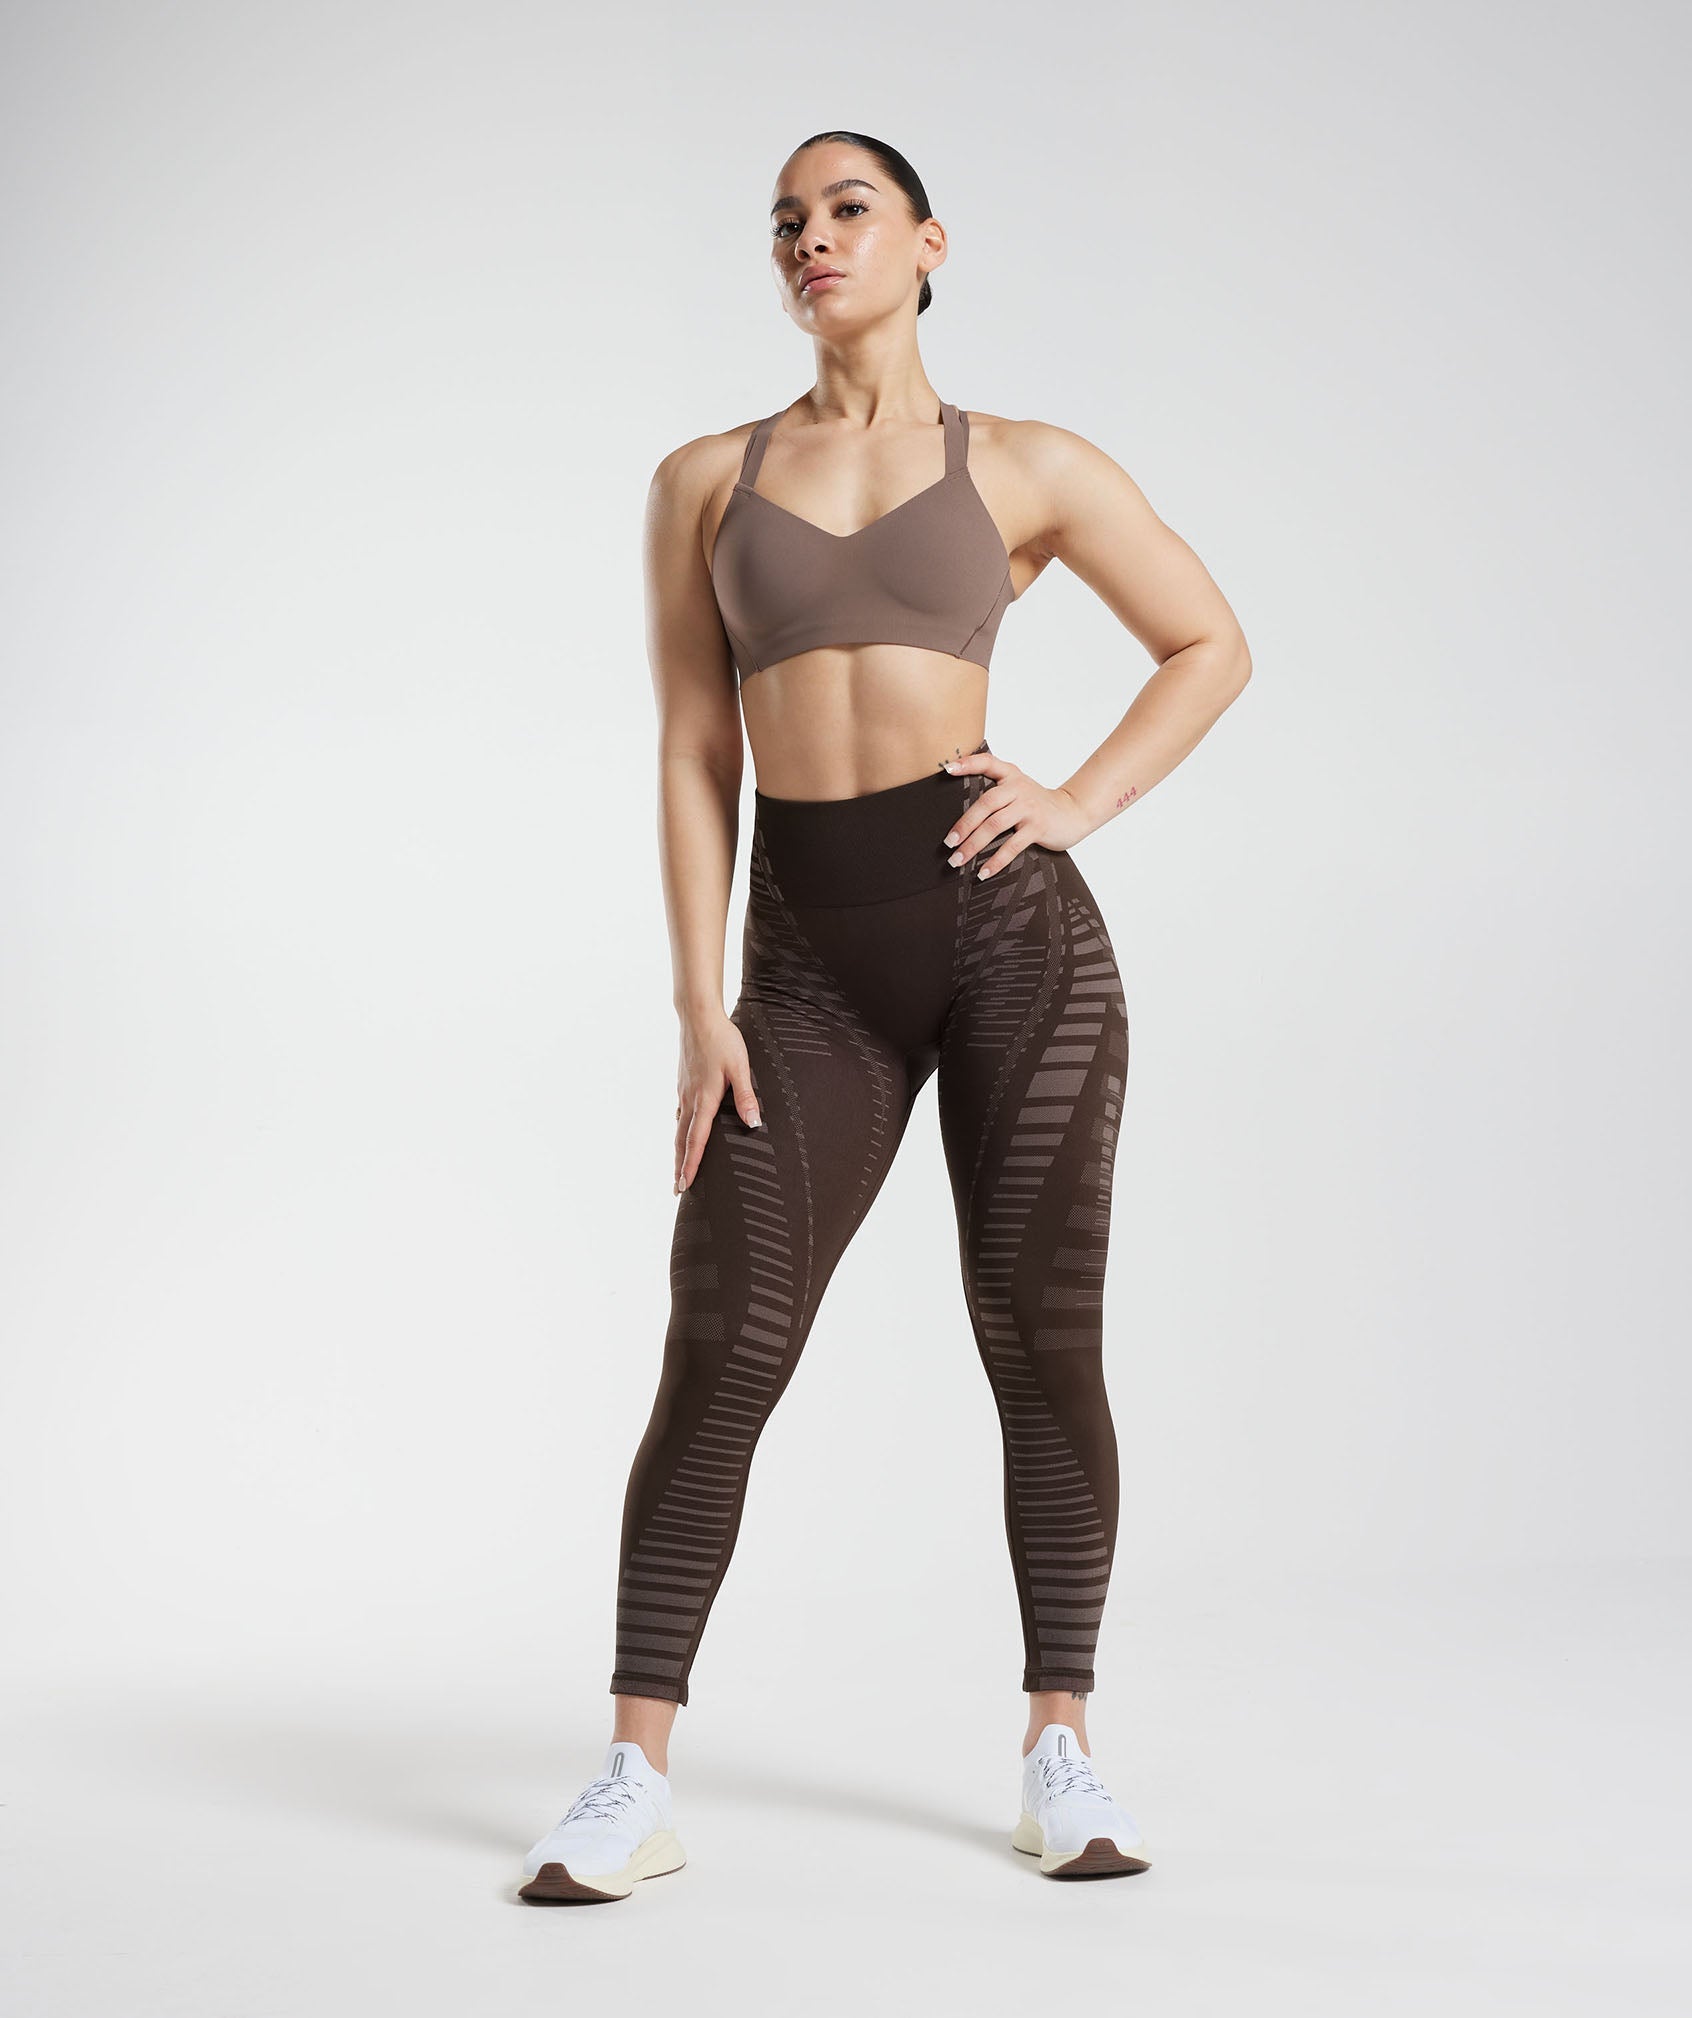 Apex Limit Leggings in Archive Brown/Truffle Brown - view 4